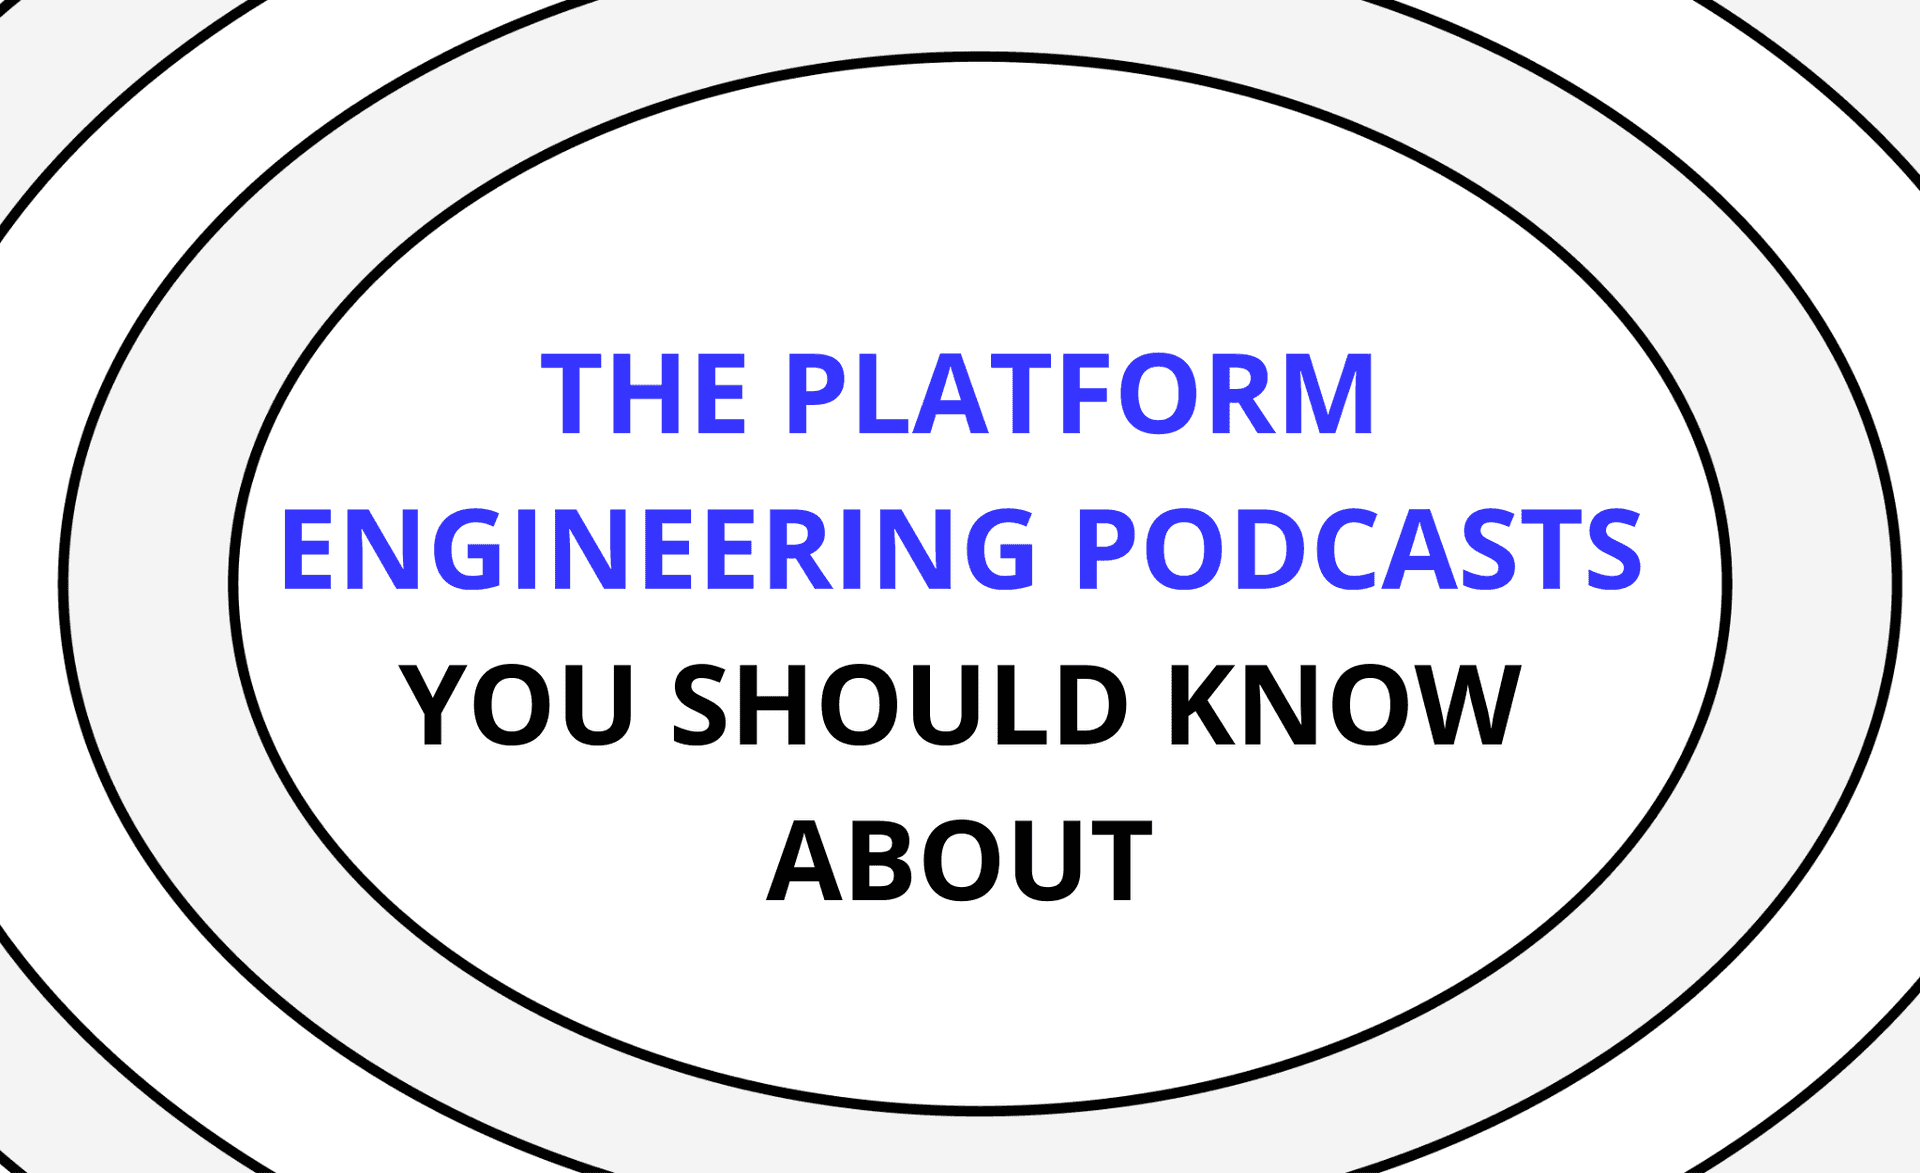 Platform Engineering Podcasts You Should Know About